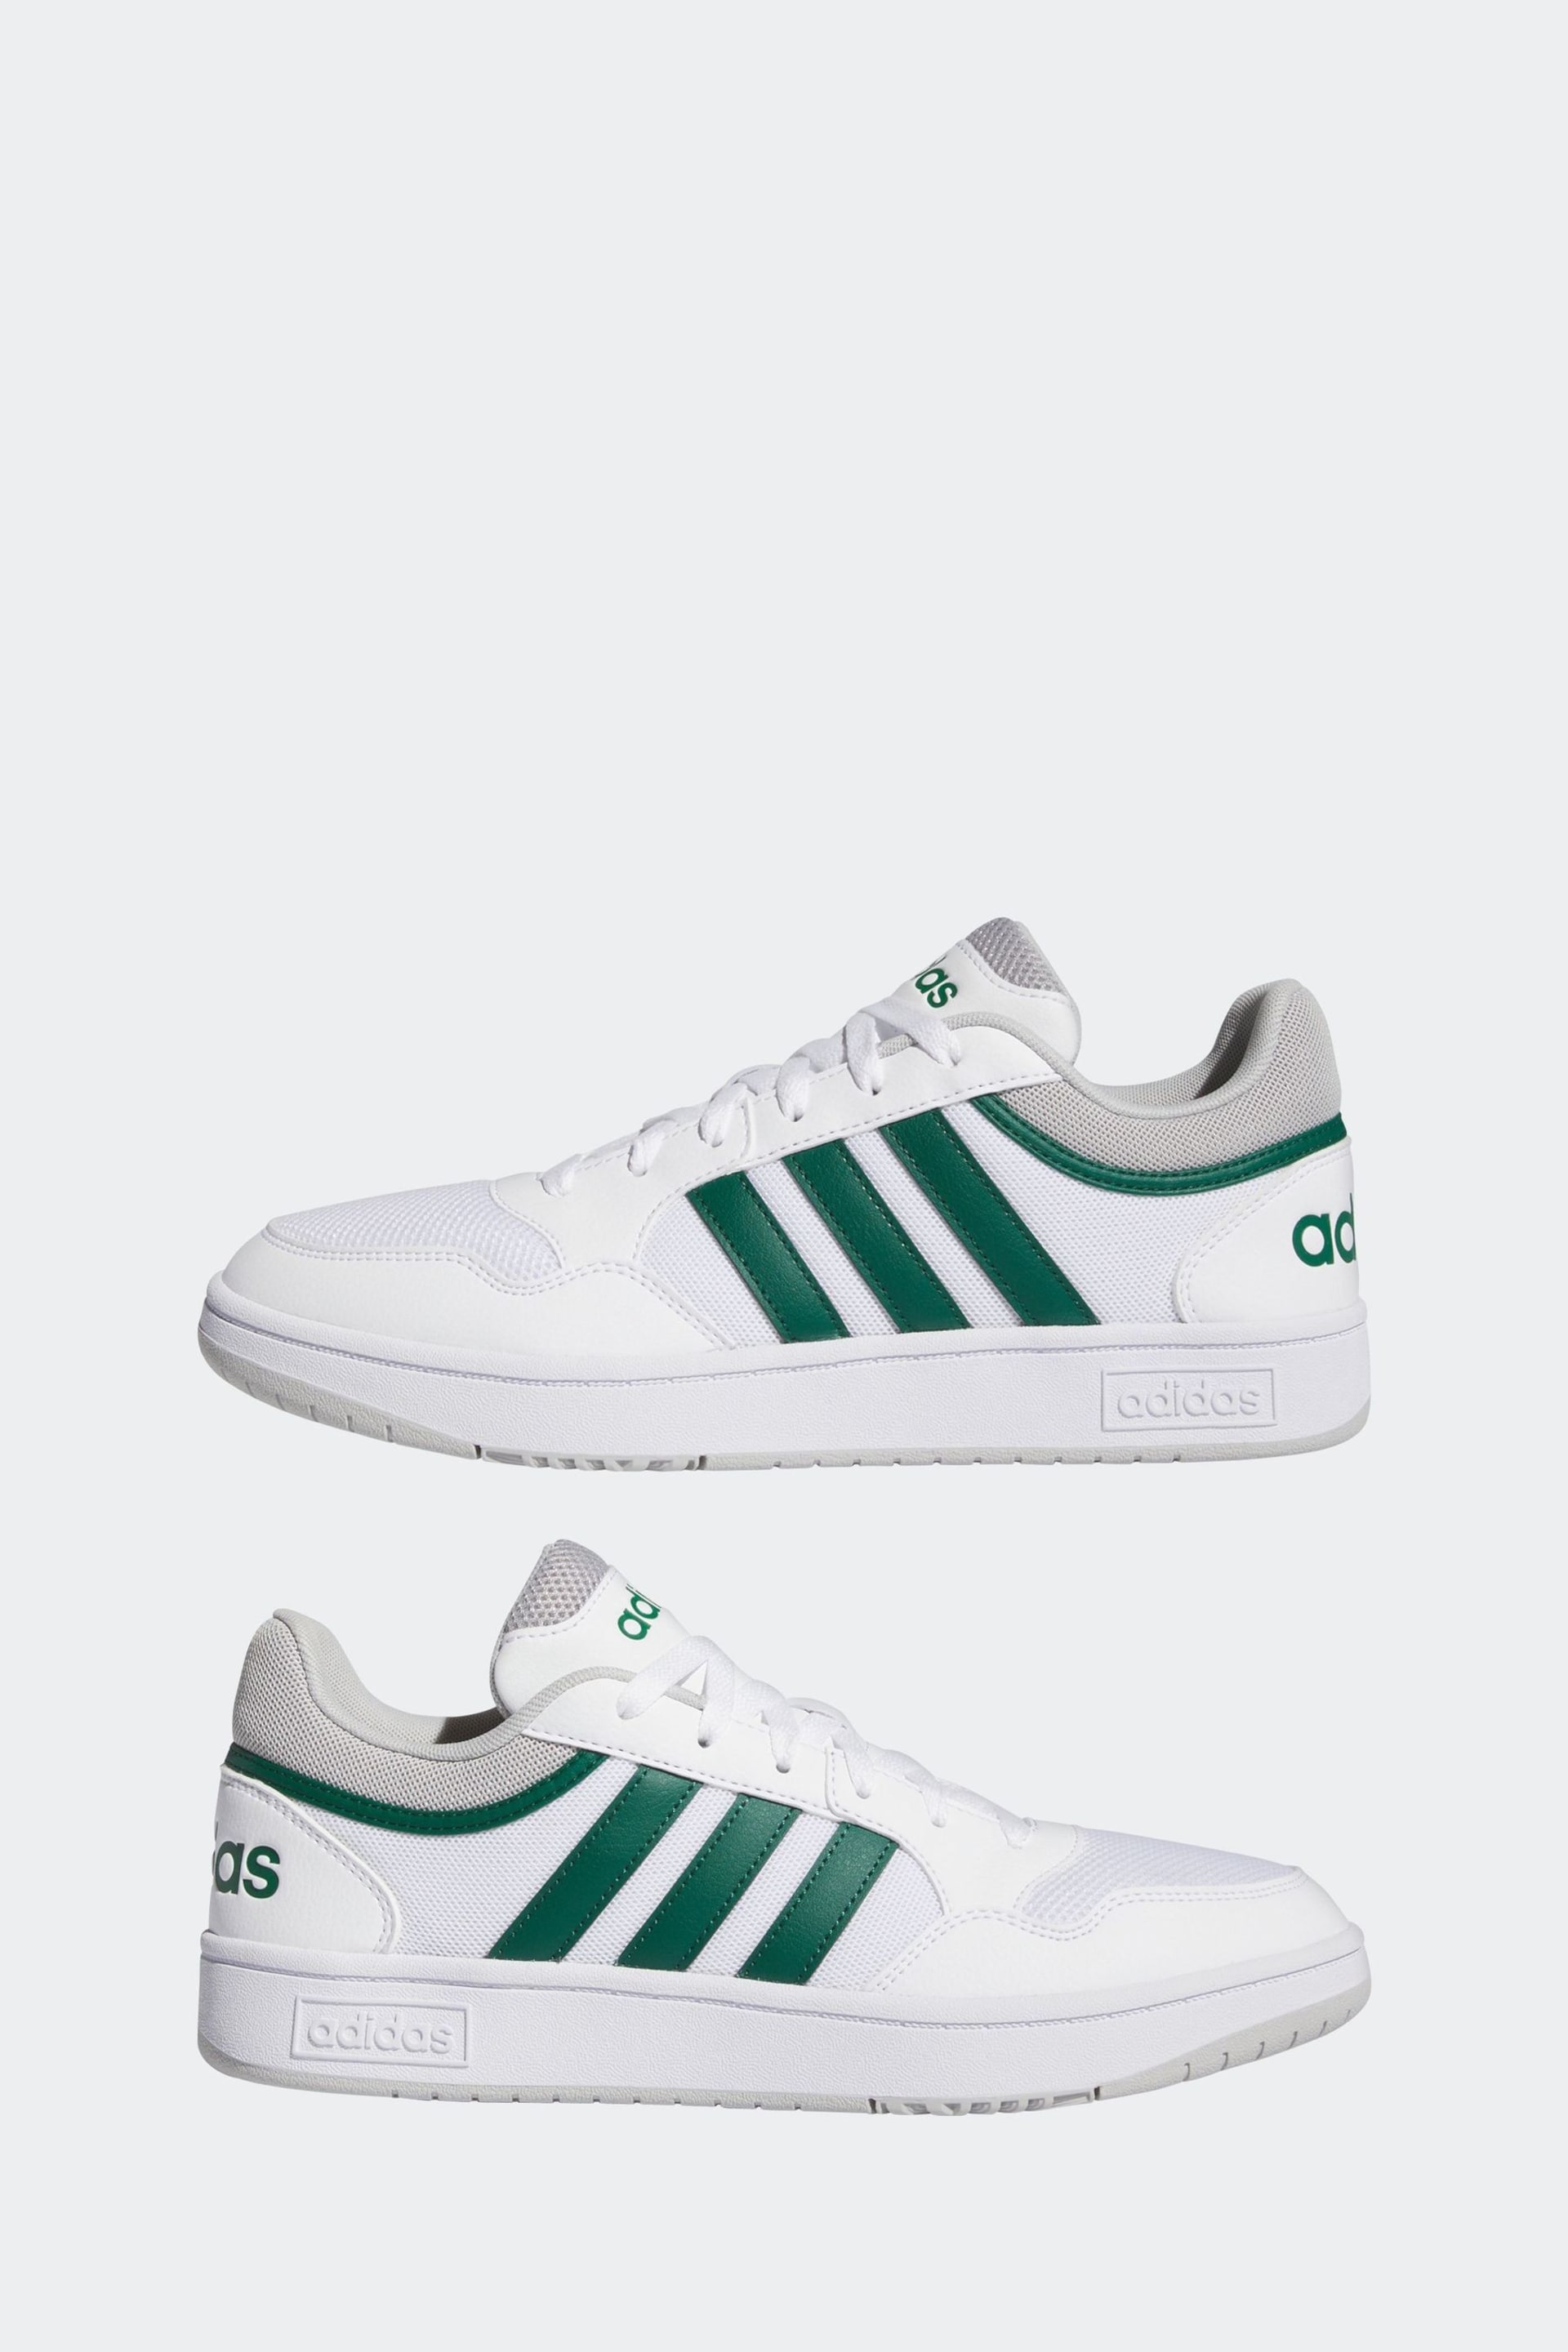 adidas Originals White Hoops 3.0 Summer Trainers - Image 5 of 9